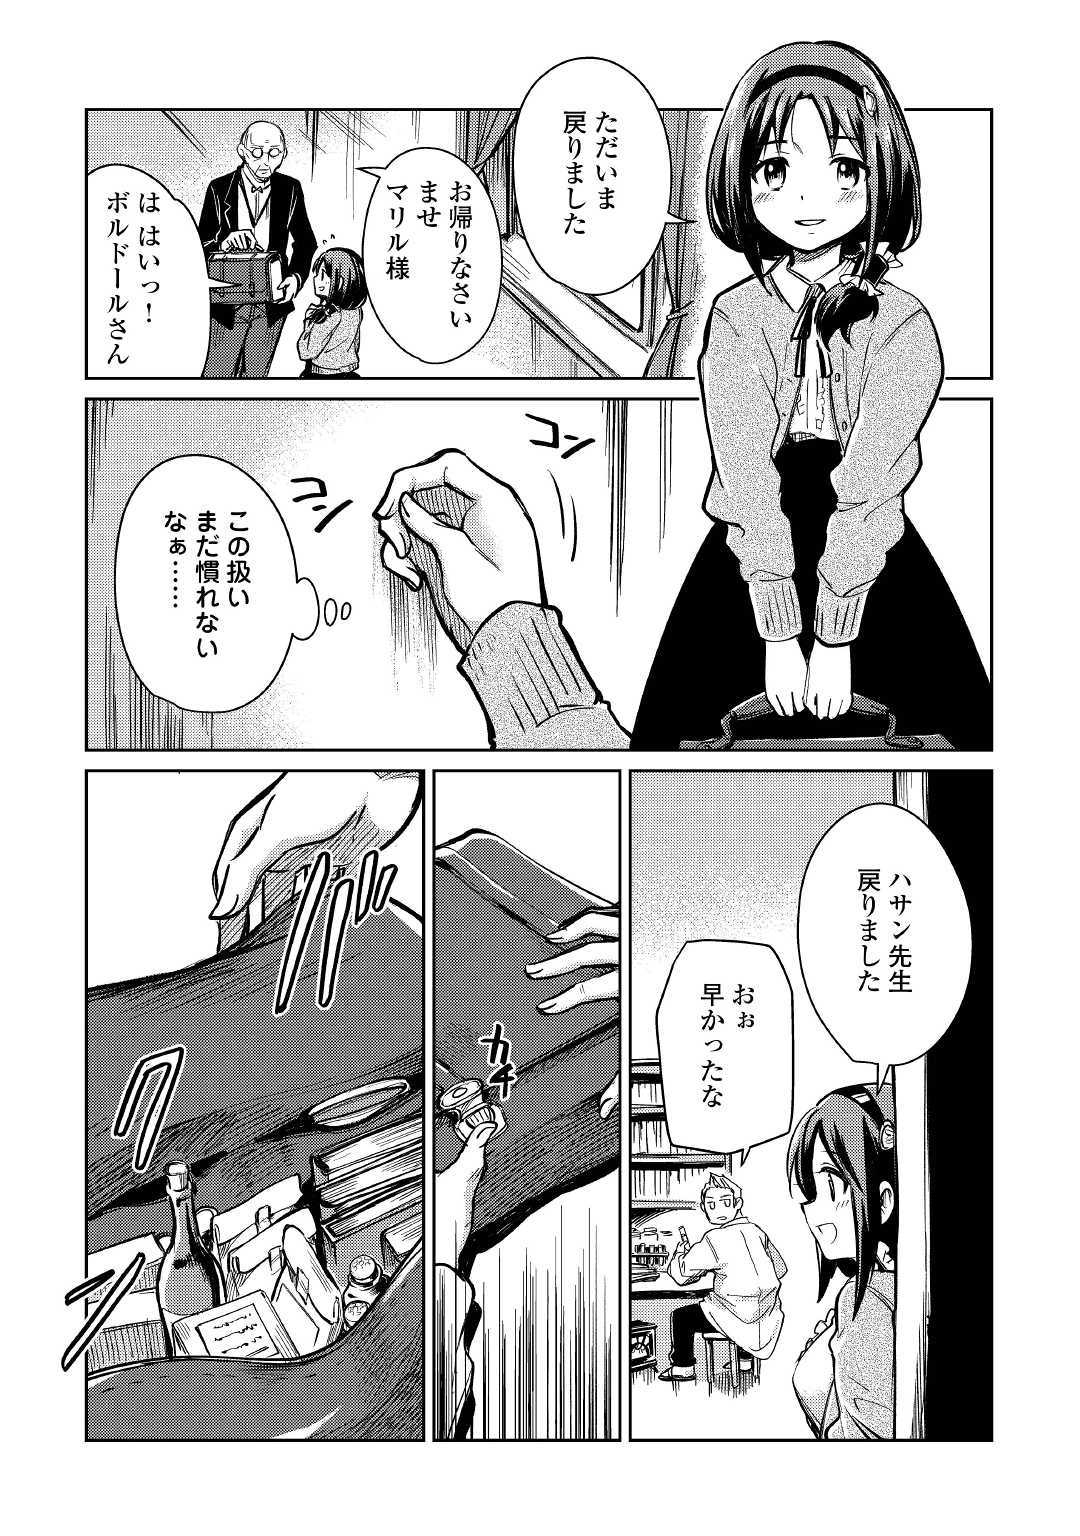 The Former Structural Researcher’s Story of Otherworldly Adventure 第21話 - Page 16